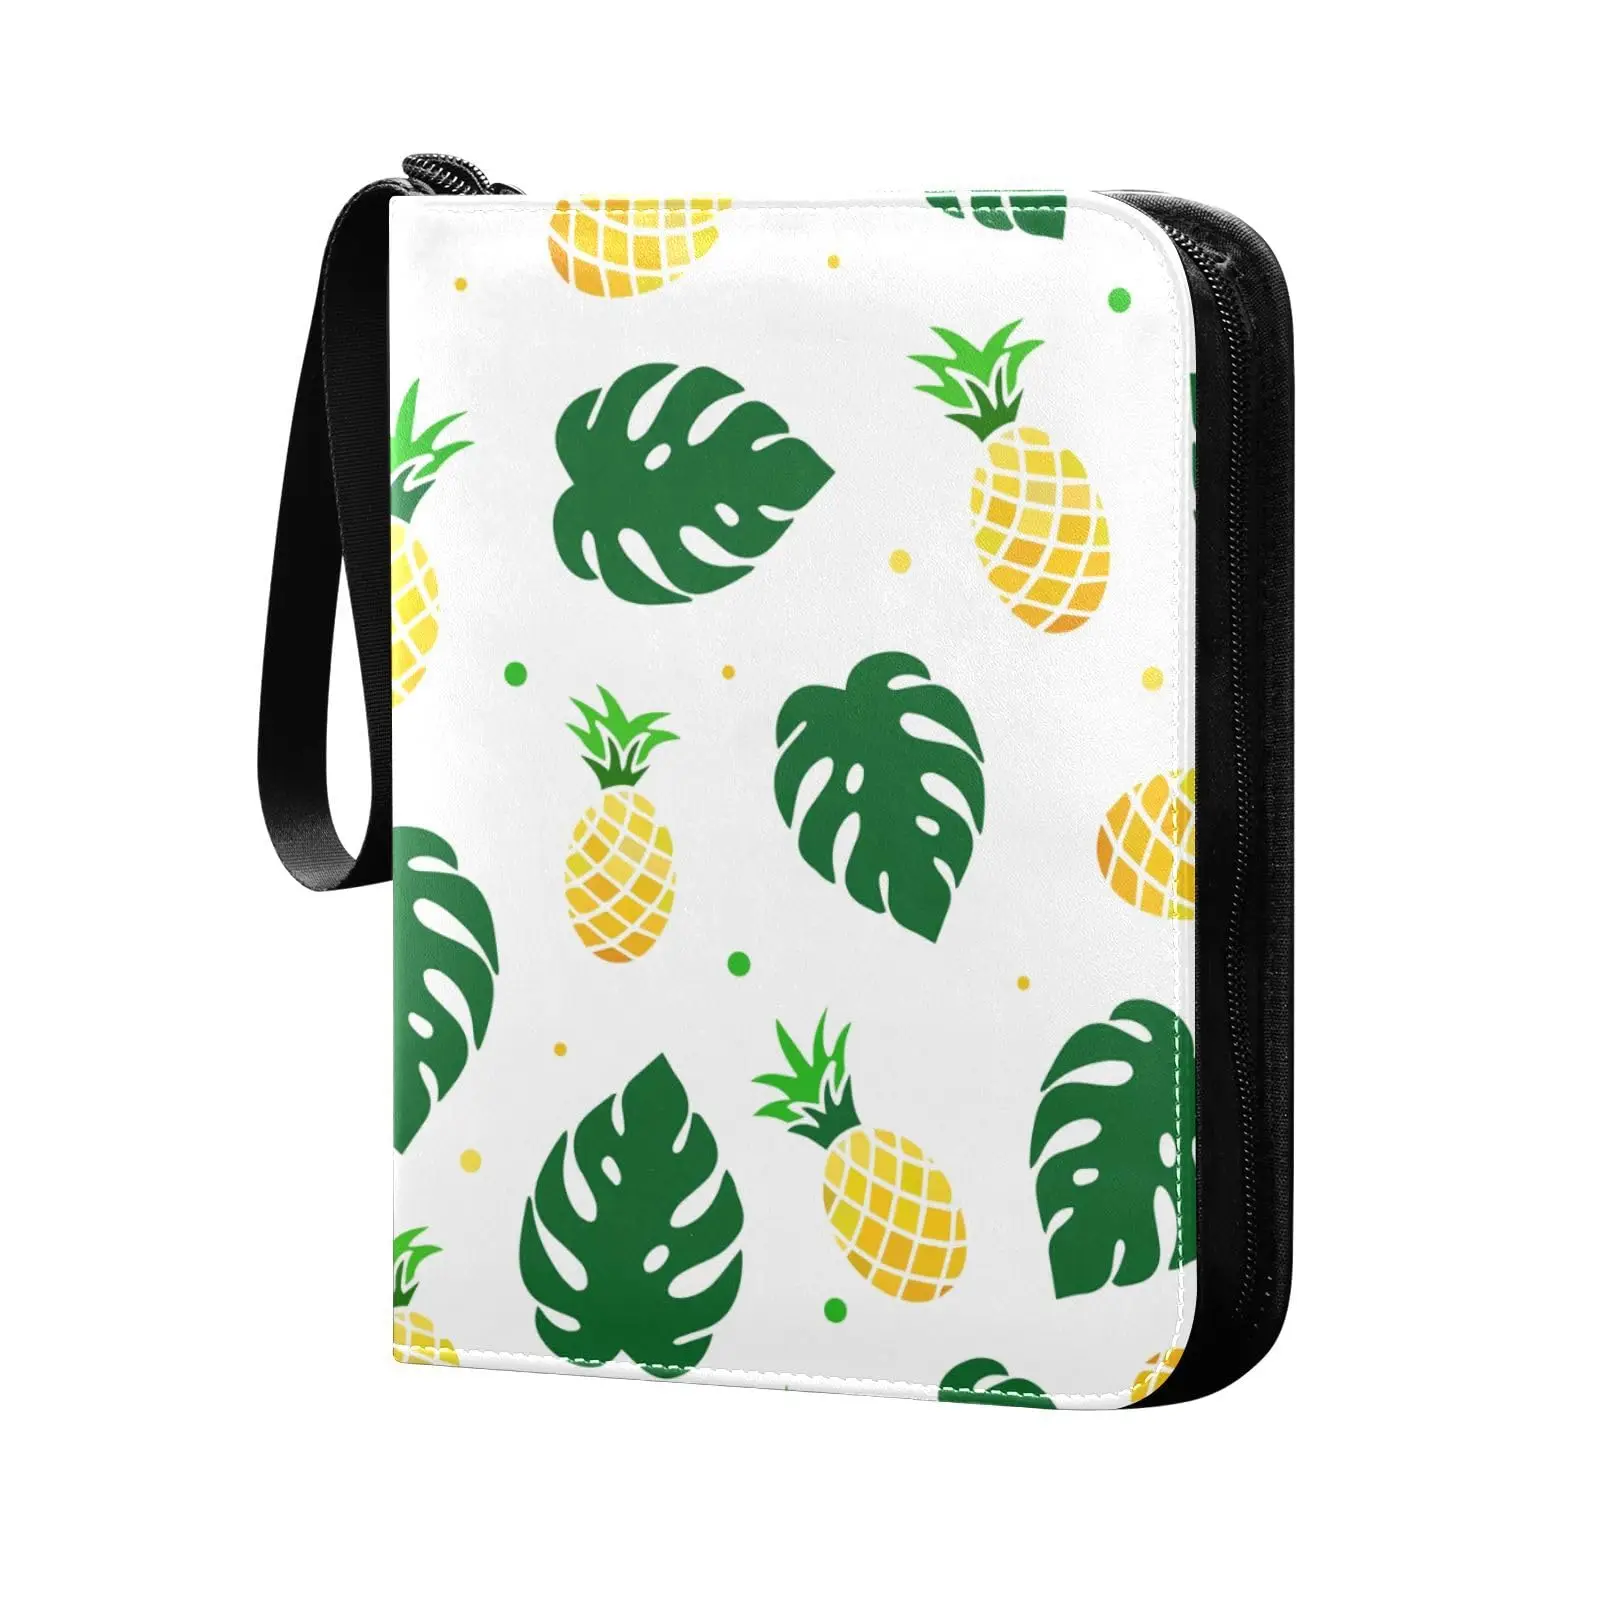 

Colorful Summer Pineapple 4 Pocket Card Binder 400 Double Sided Pocket Album for Sport Game Cards Unique Card Collection Storage